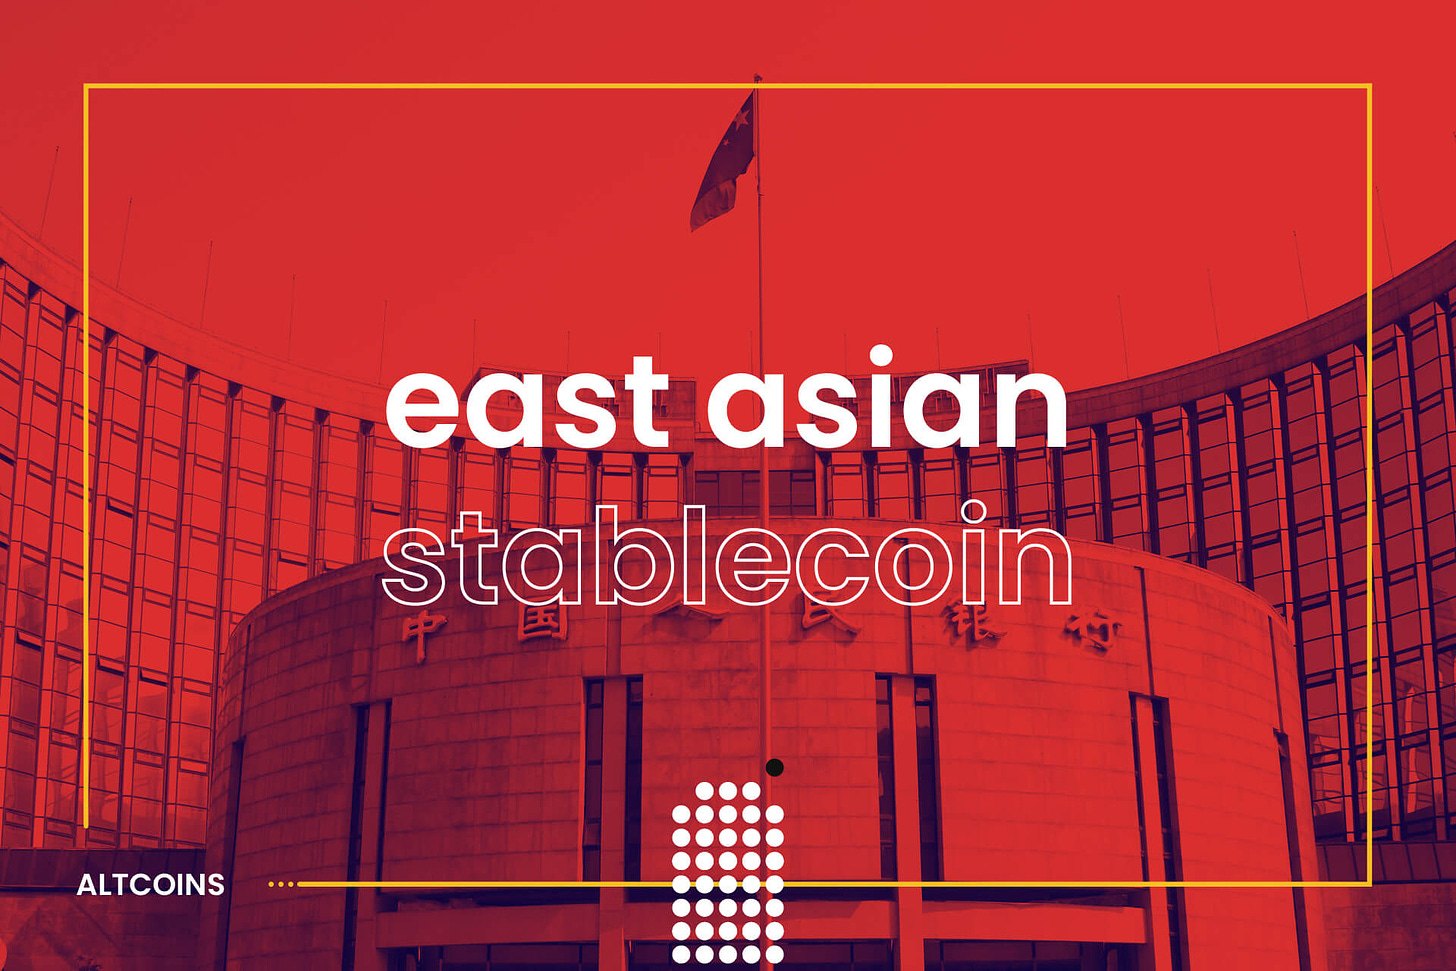 China's Propose of Regional East Asian Stablecoin | DailyCoin.com